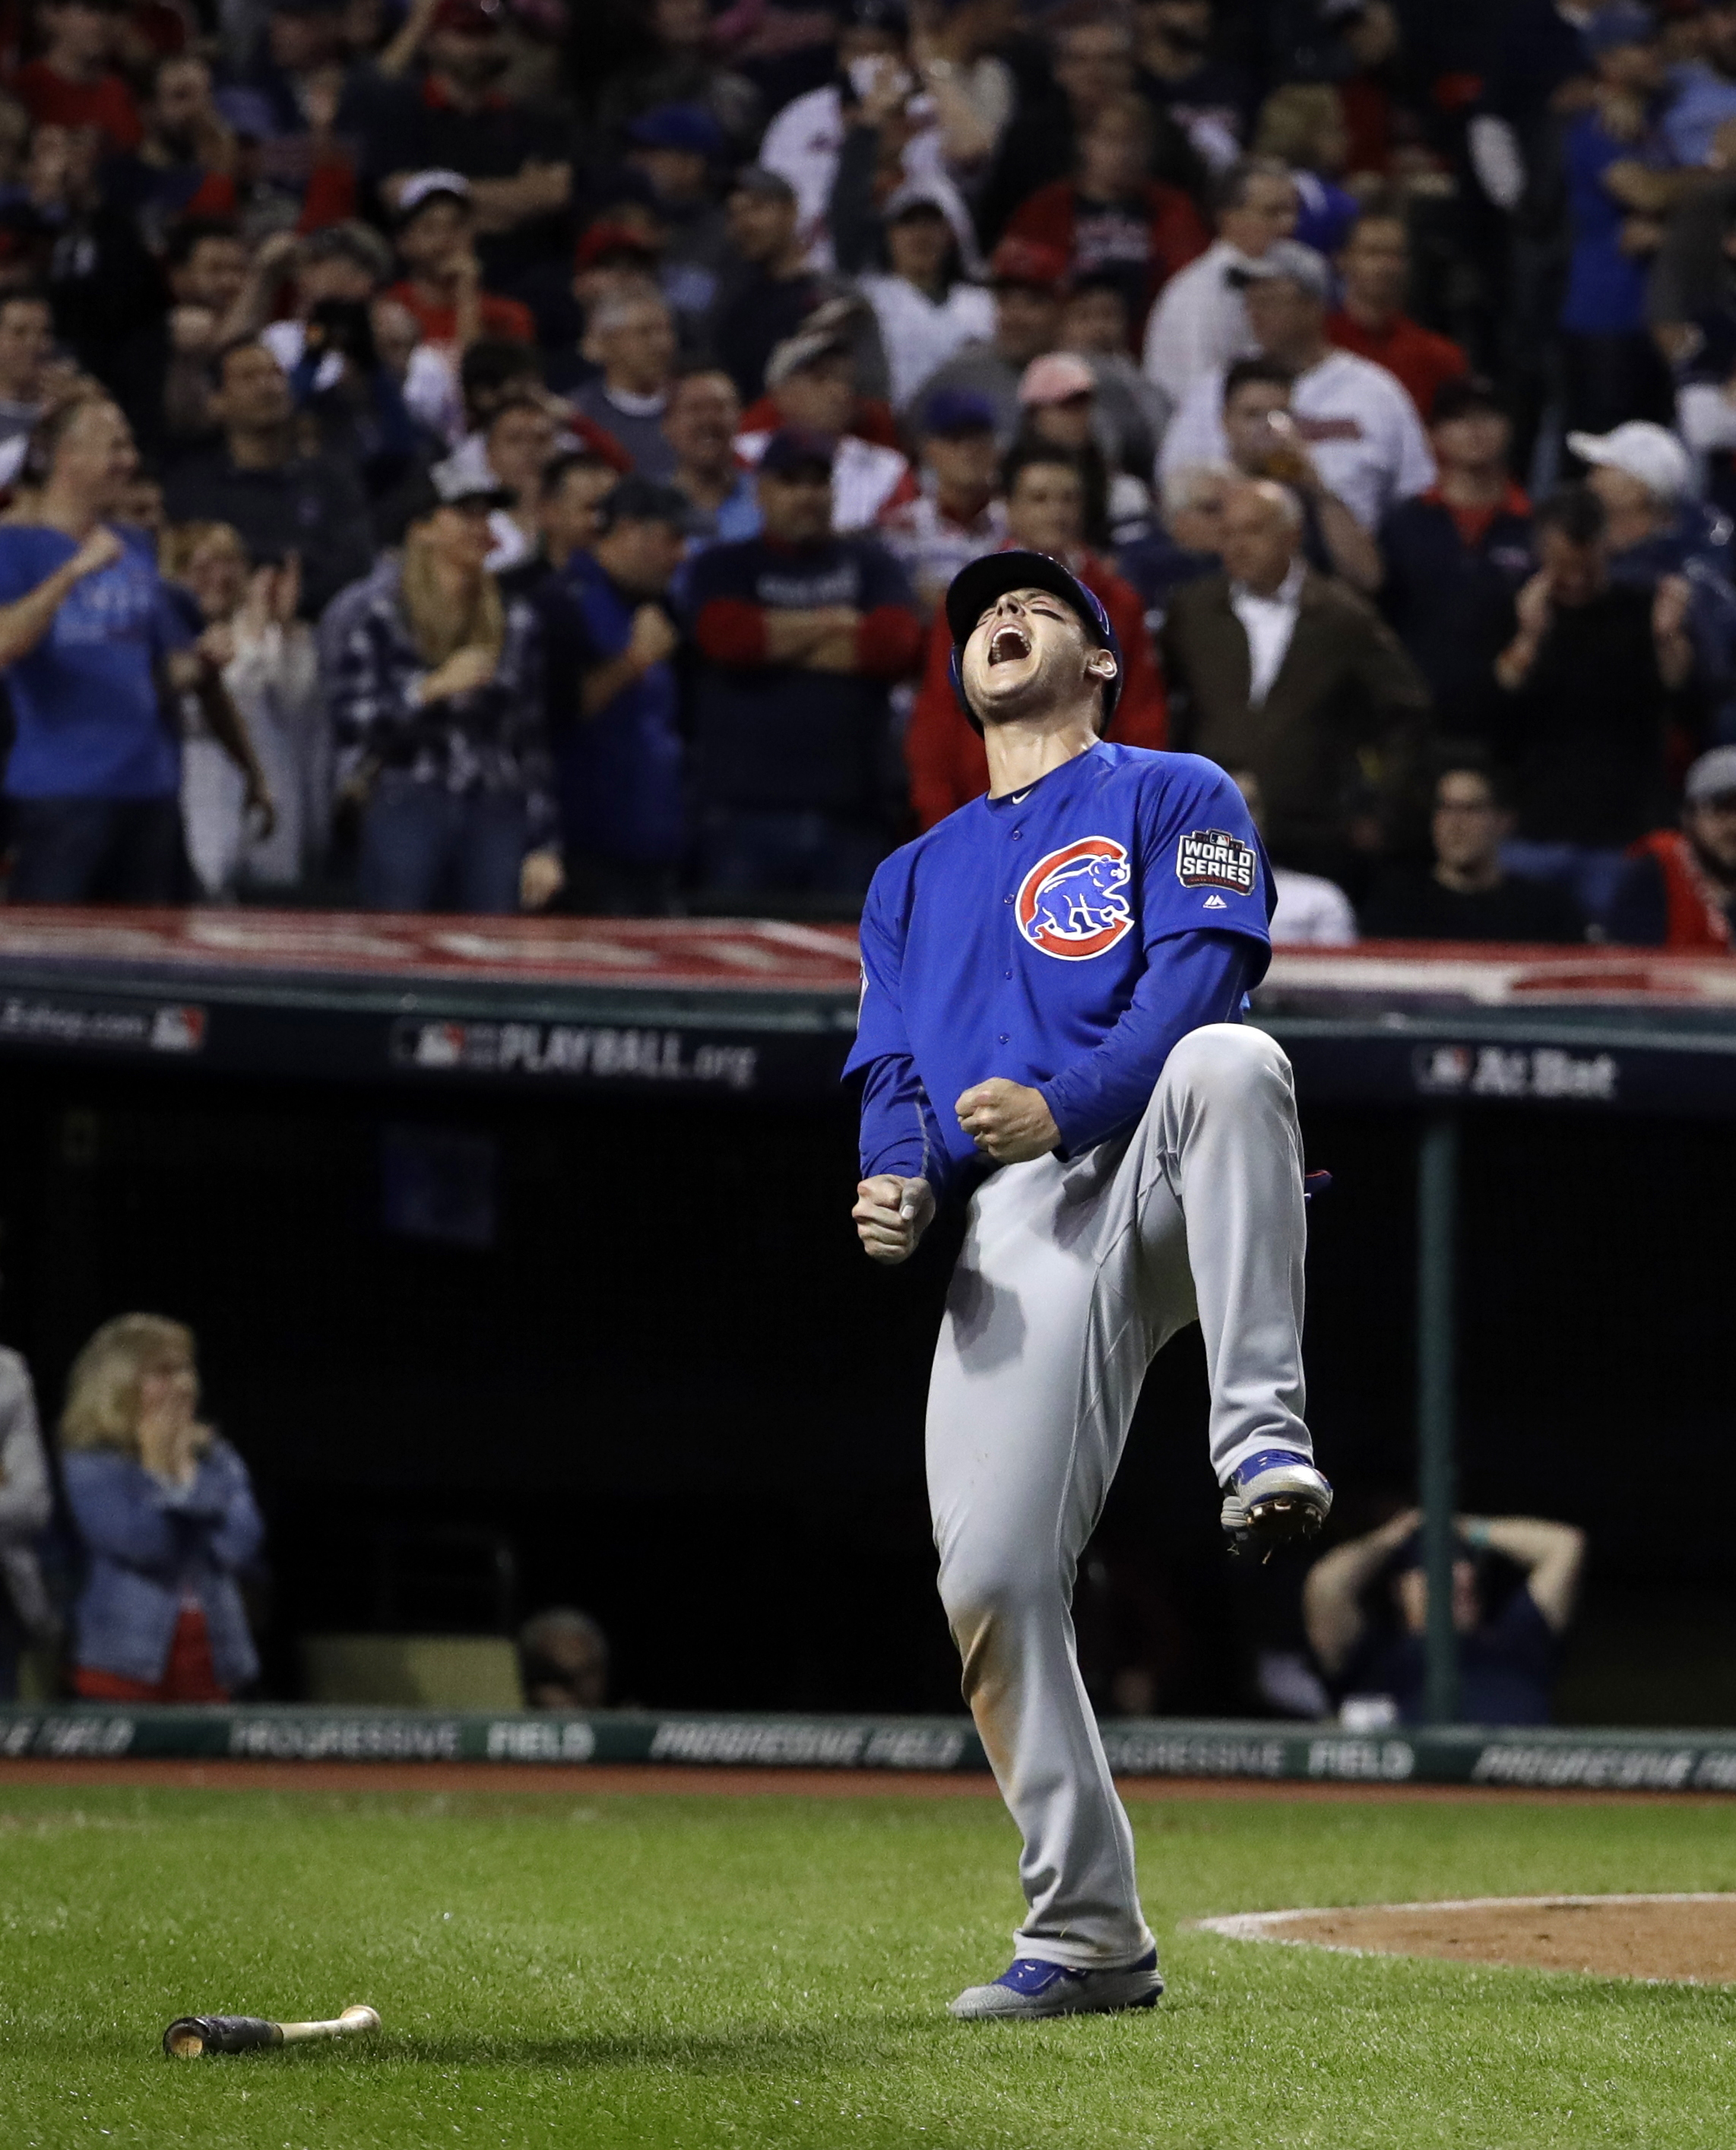 How Chicago Celebrated Their First World Series Win Since 1908